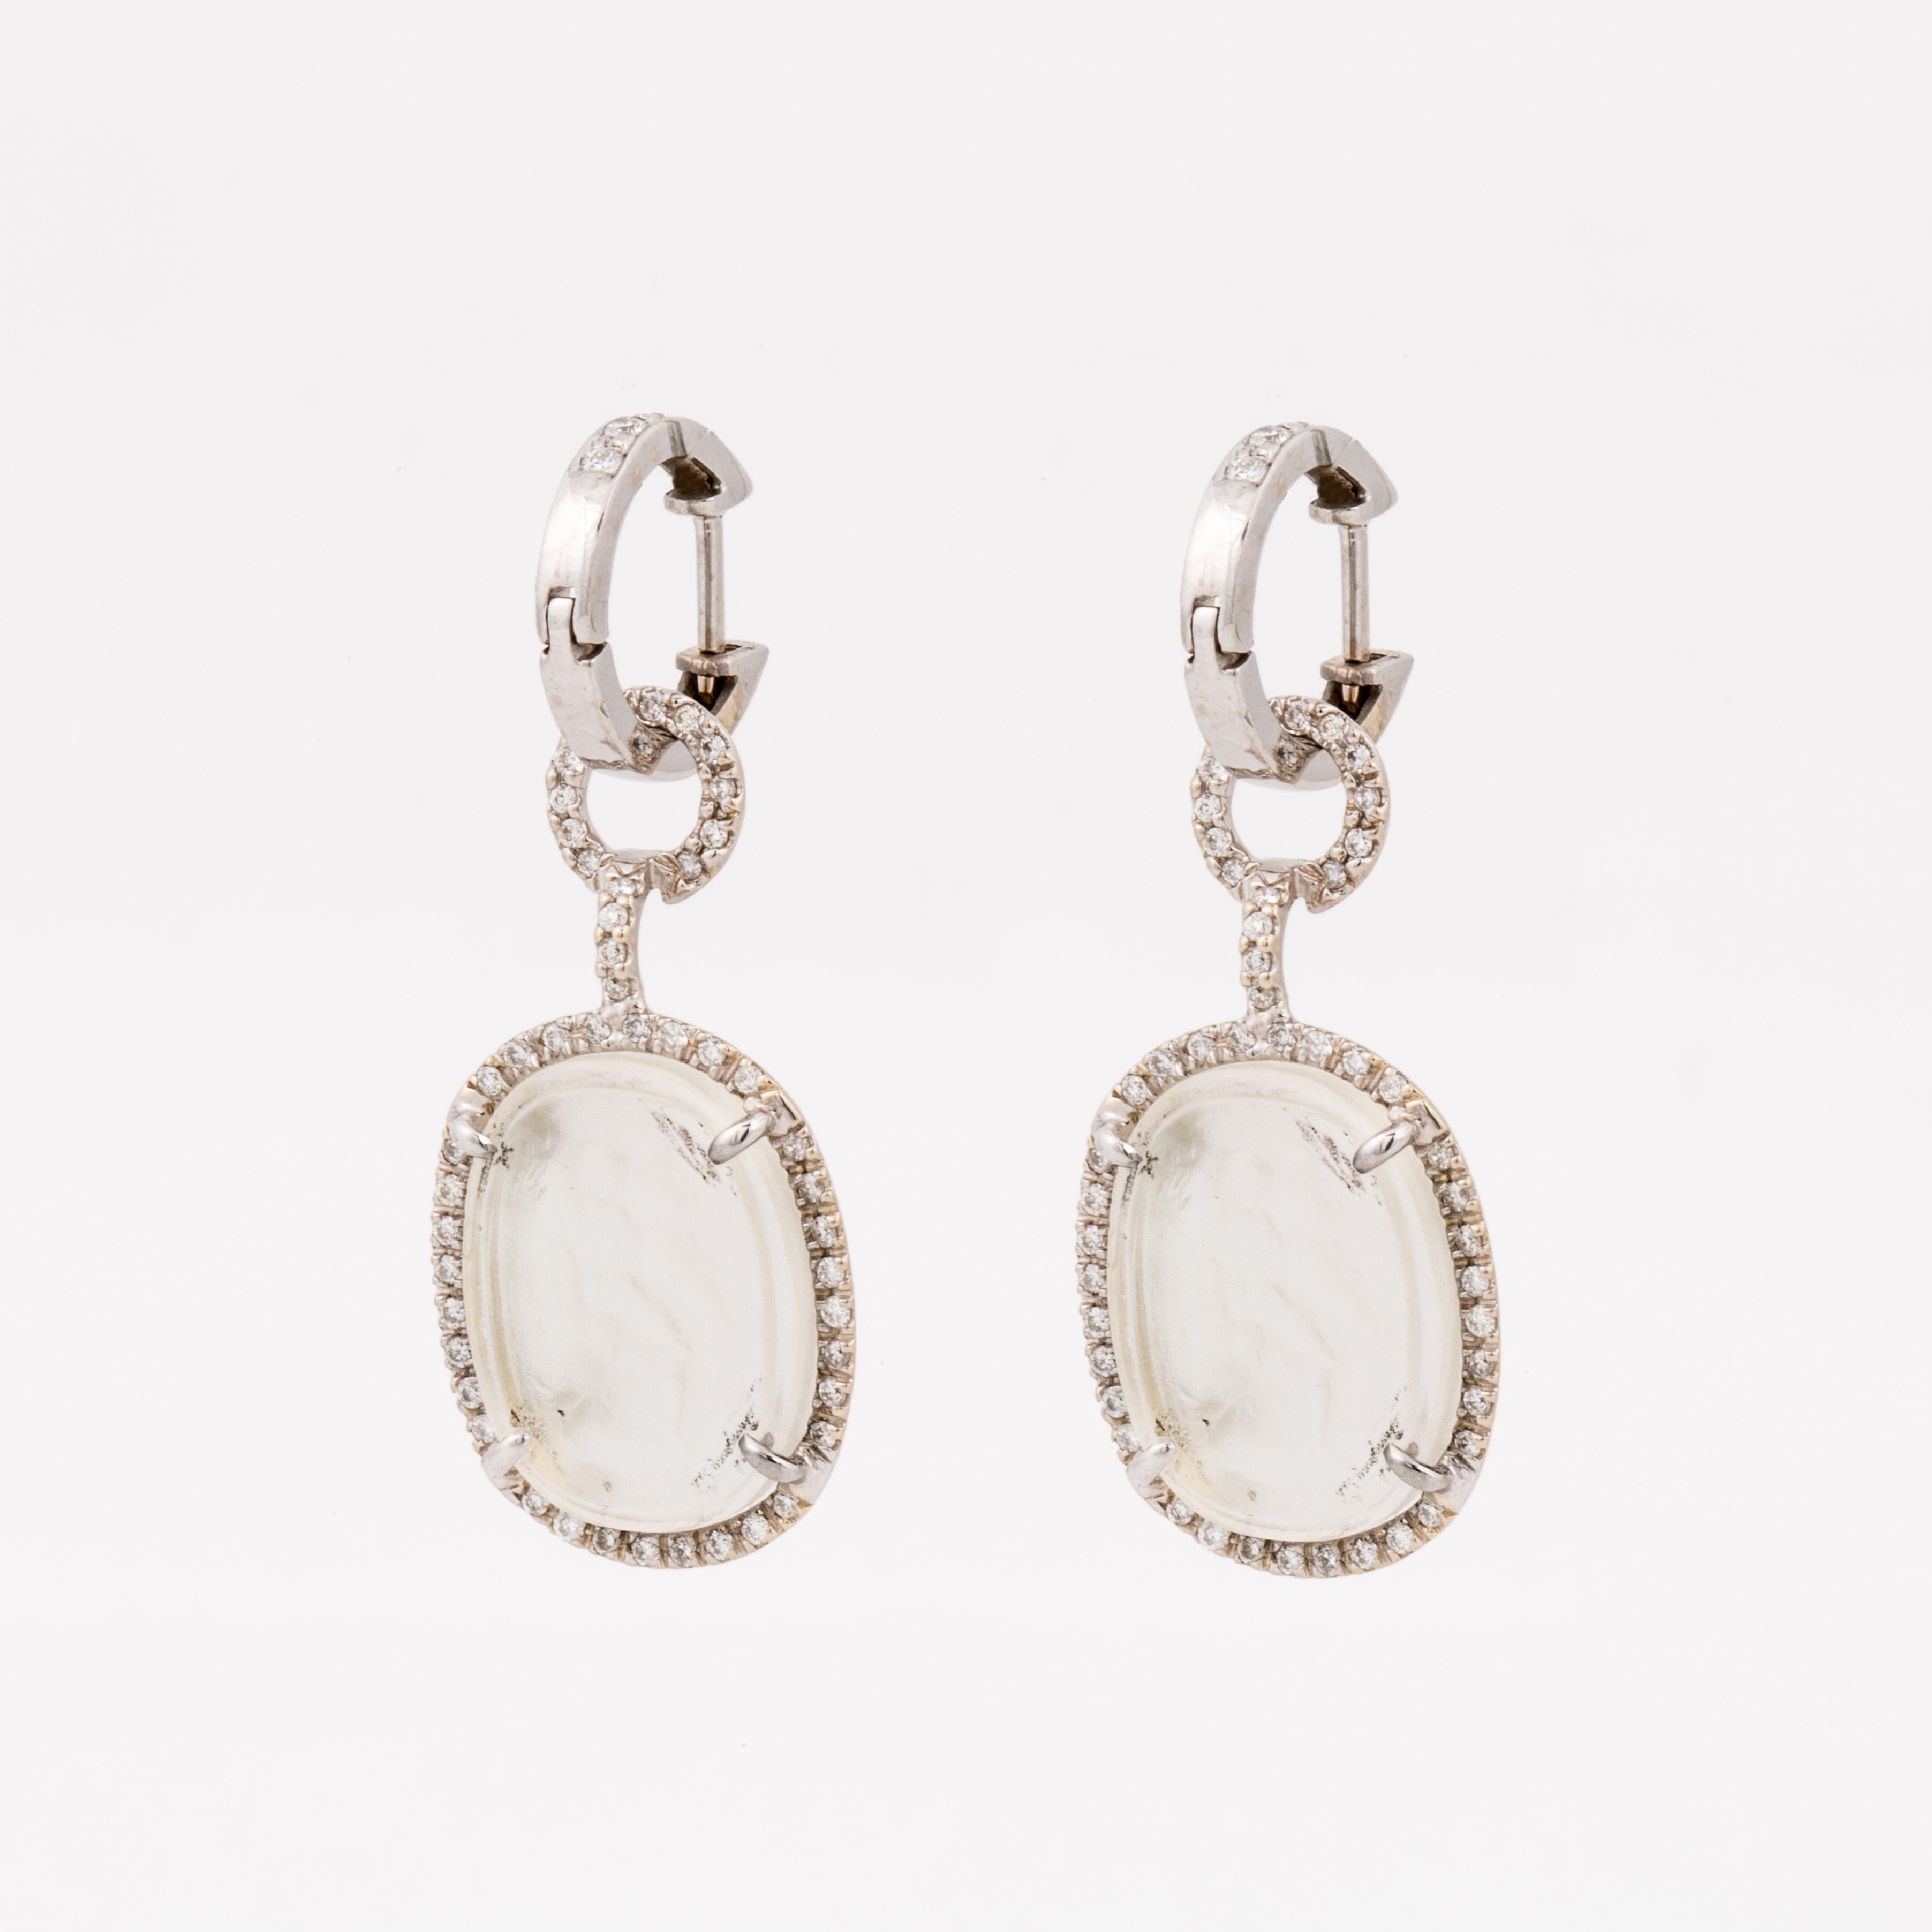 Mazza 14K white gold huggie style earrings with removable Venetian glass drops.  The drops are made of Venetian glass backed with mother-of-pearl and framed with round diamonds.  There are 0.59 carats of diamonds.  They measure 1 1/2 inches in